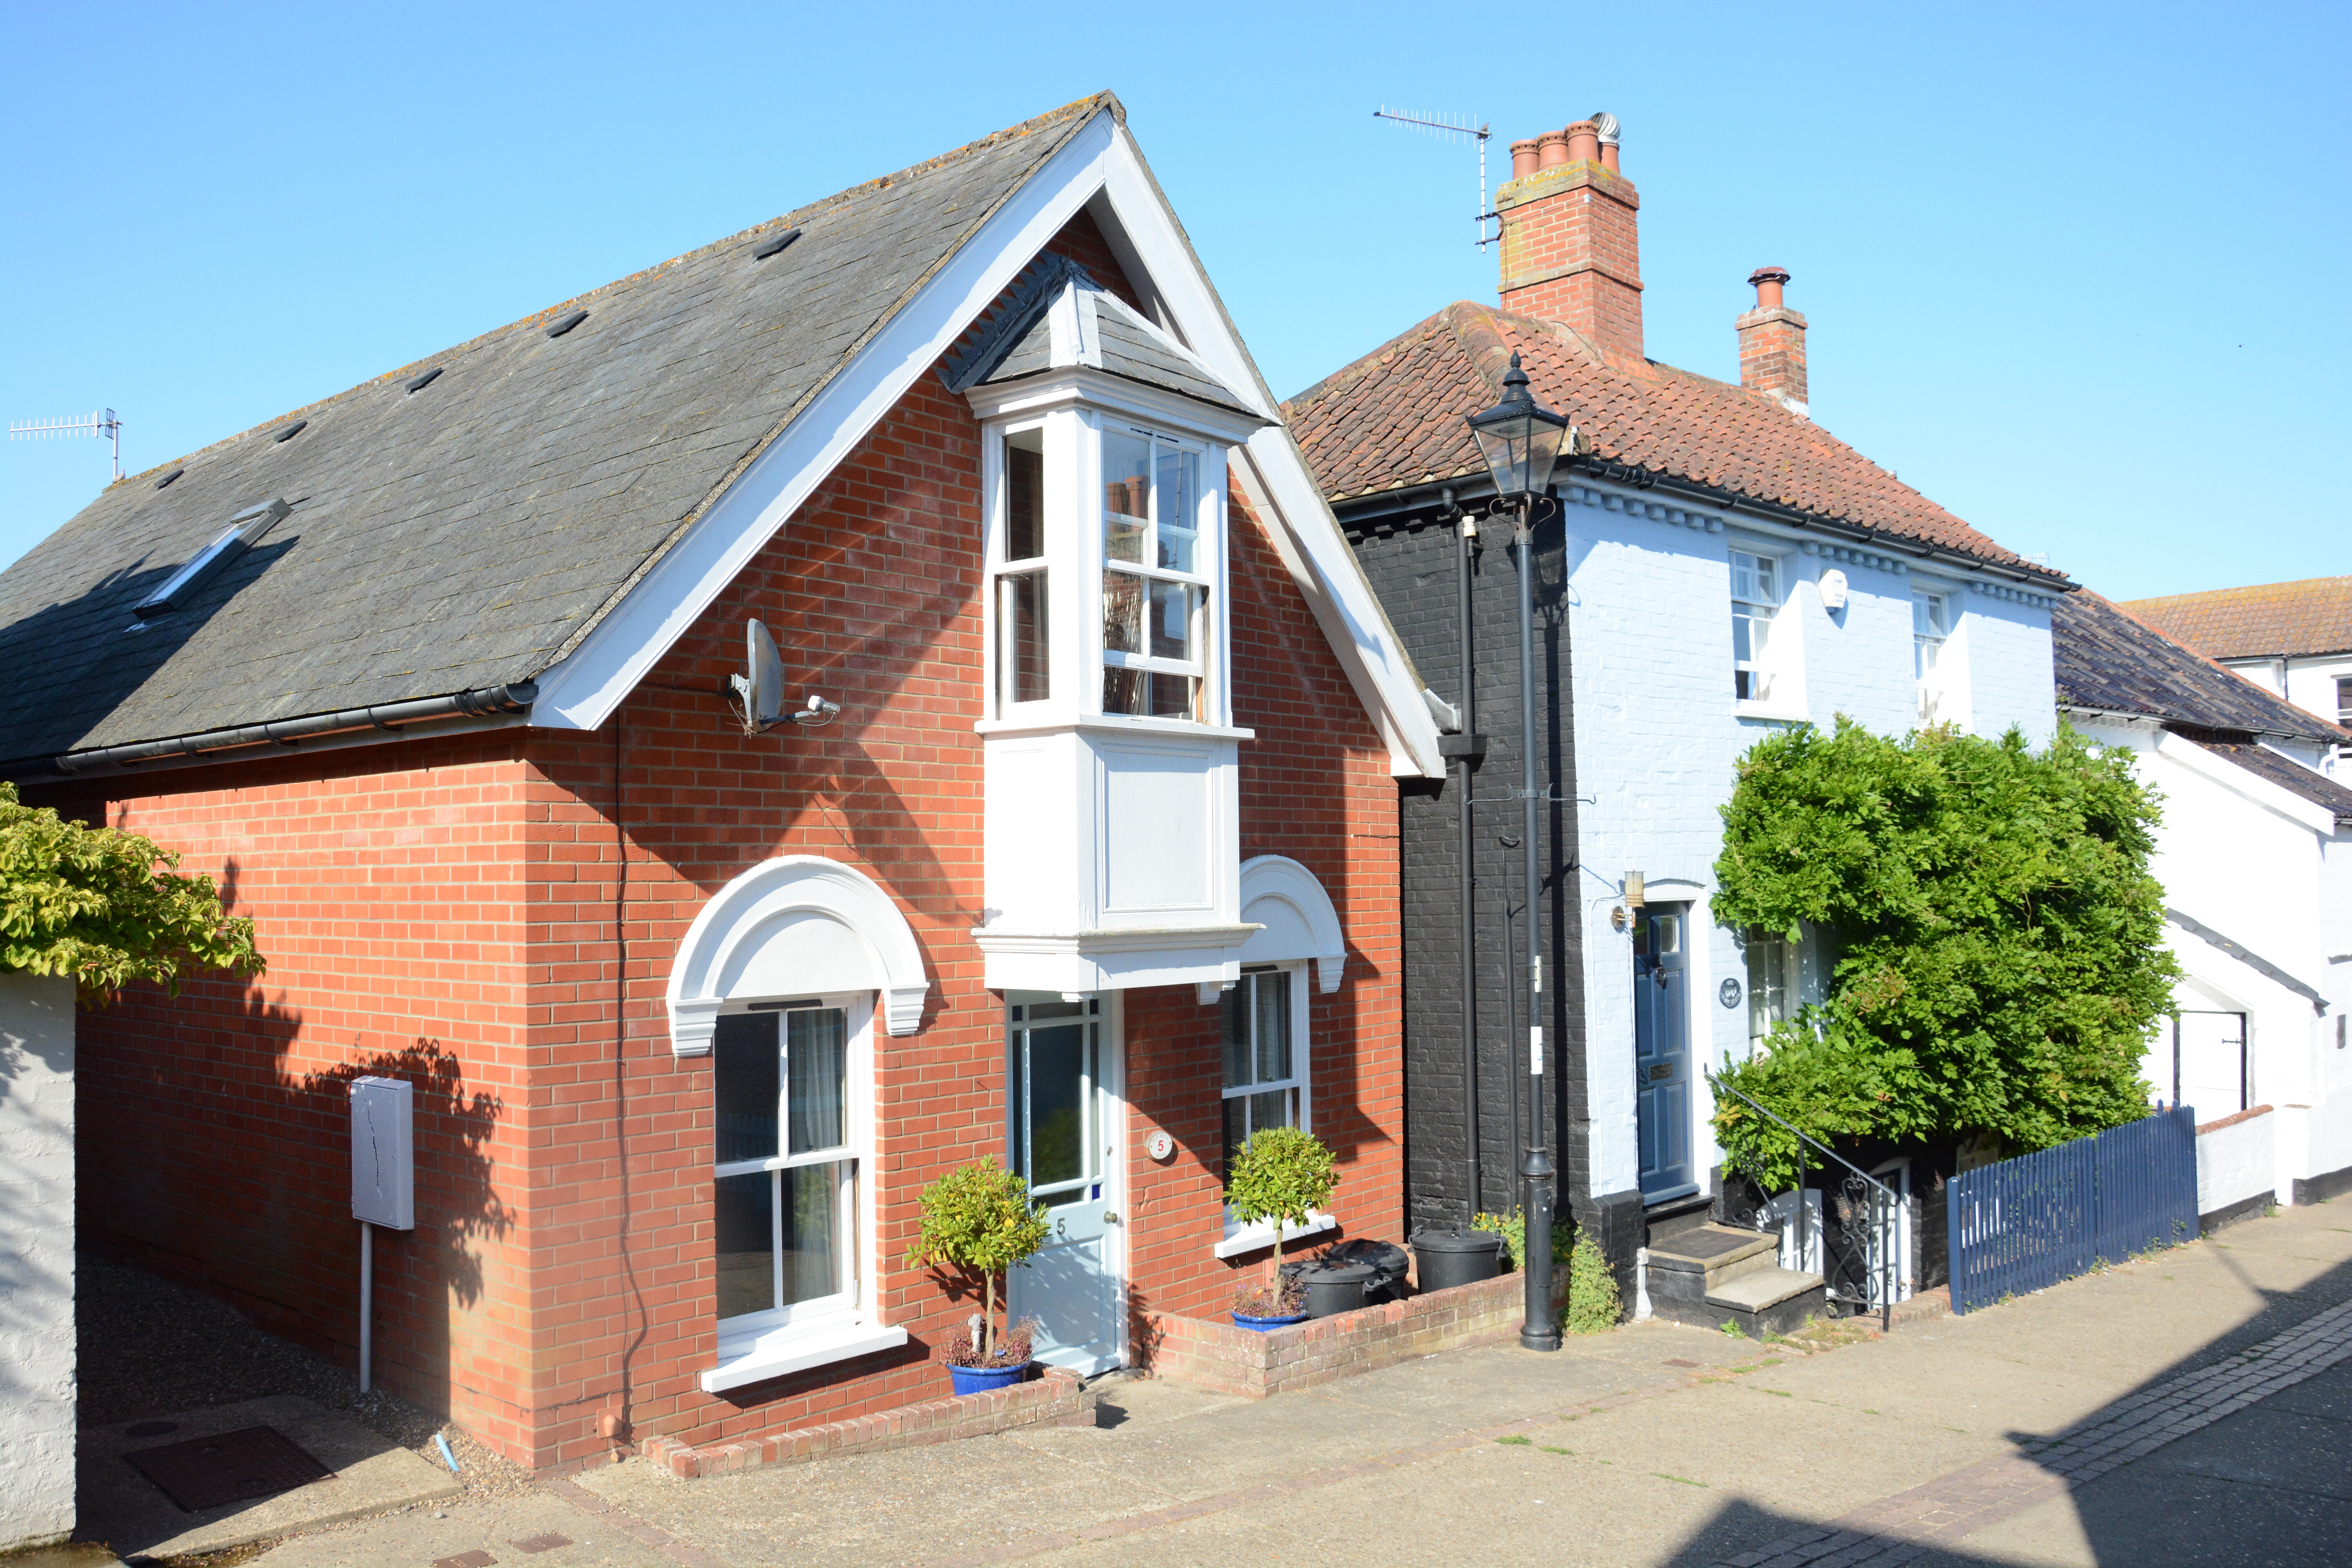 Holiday Cottages in Suffolk: The Red Brick House, Aldeburgh | sykescottages.co.uk 